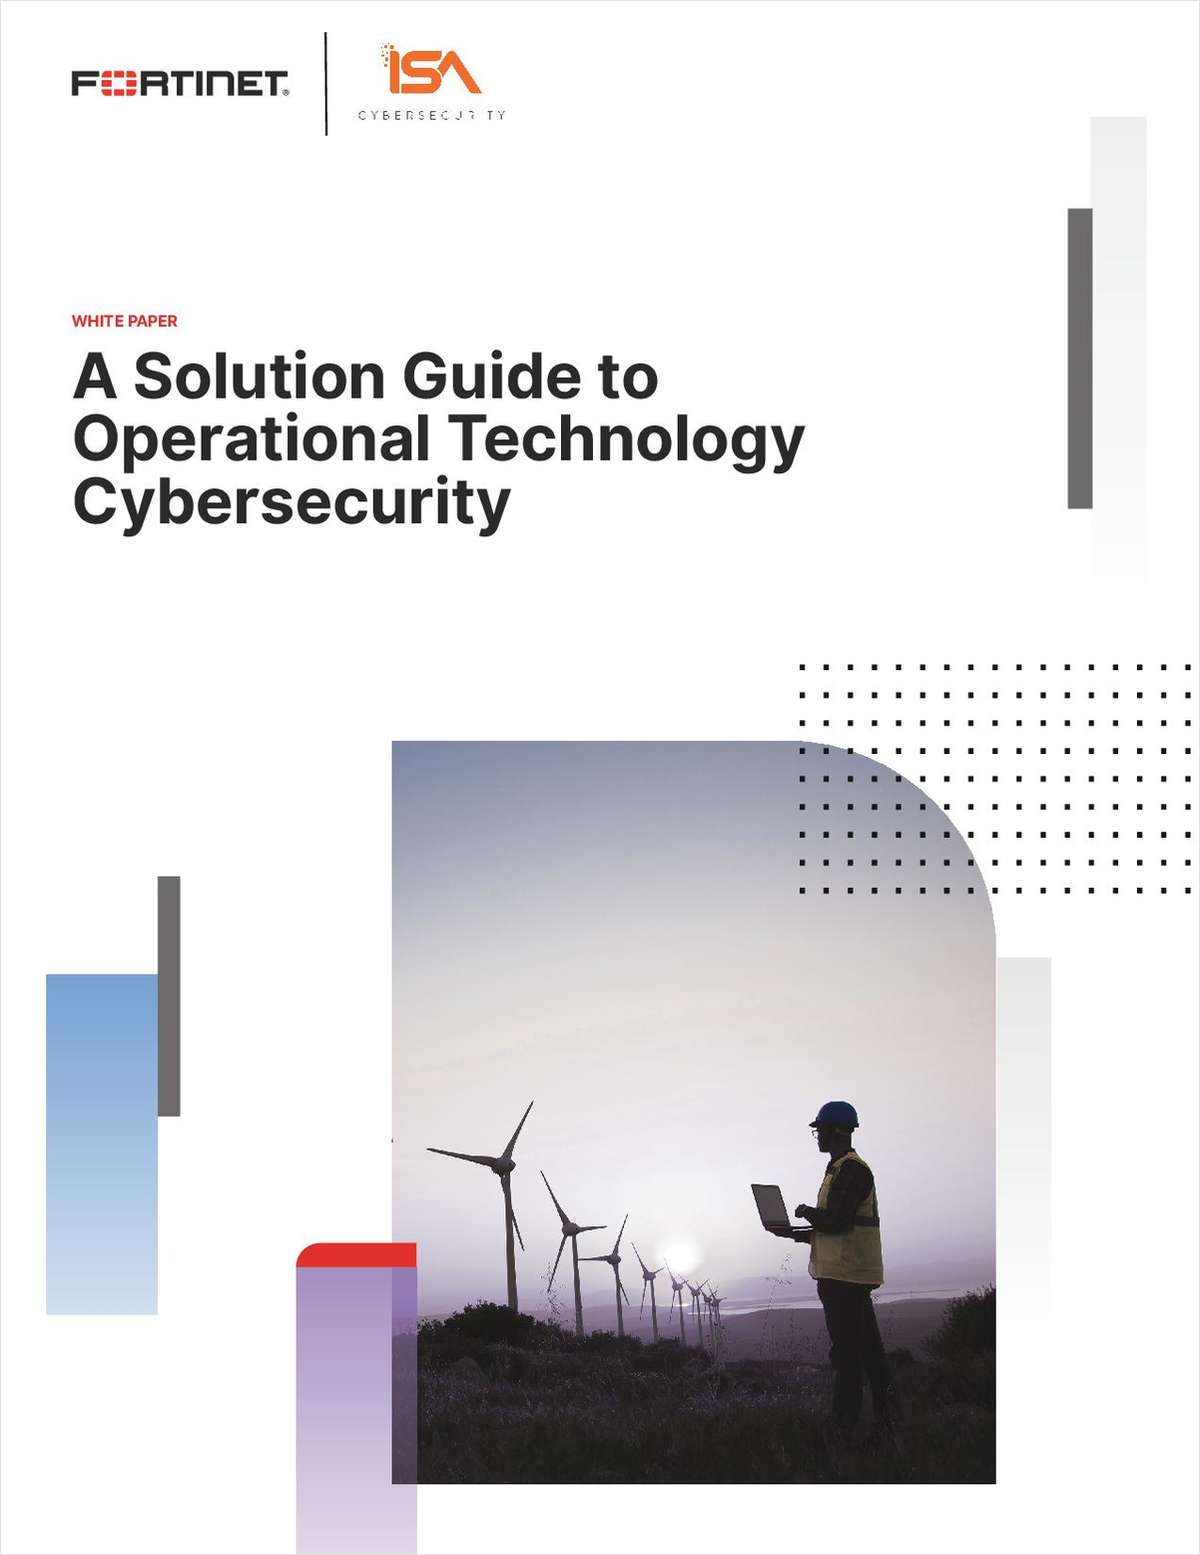 A Solution Guide to Operational Technology Cybersecurity